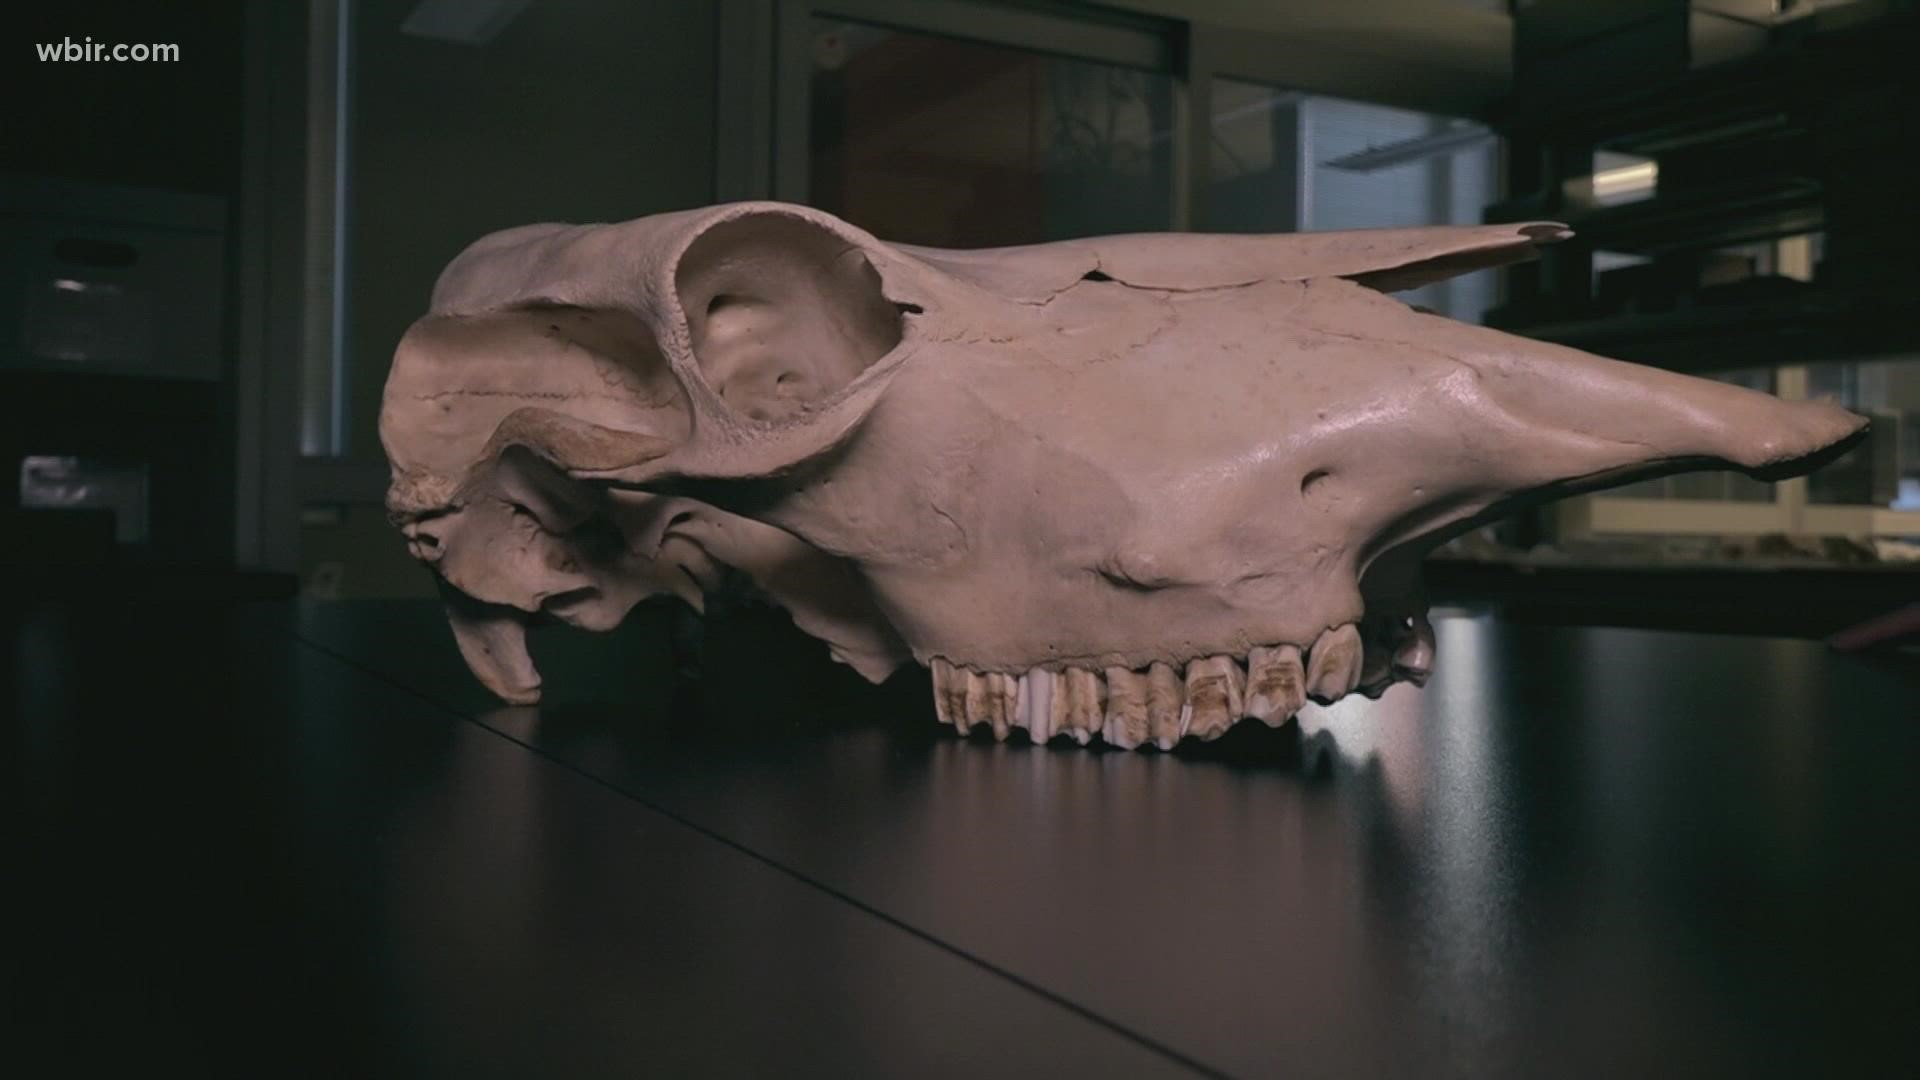 From alligators to ostriches, we take a look at the anthropology department's collection, which is one of the largest of its kind in the U.S.